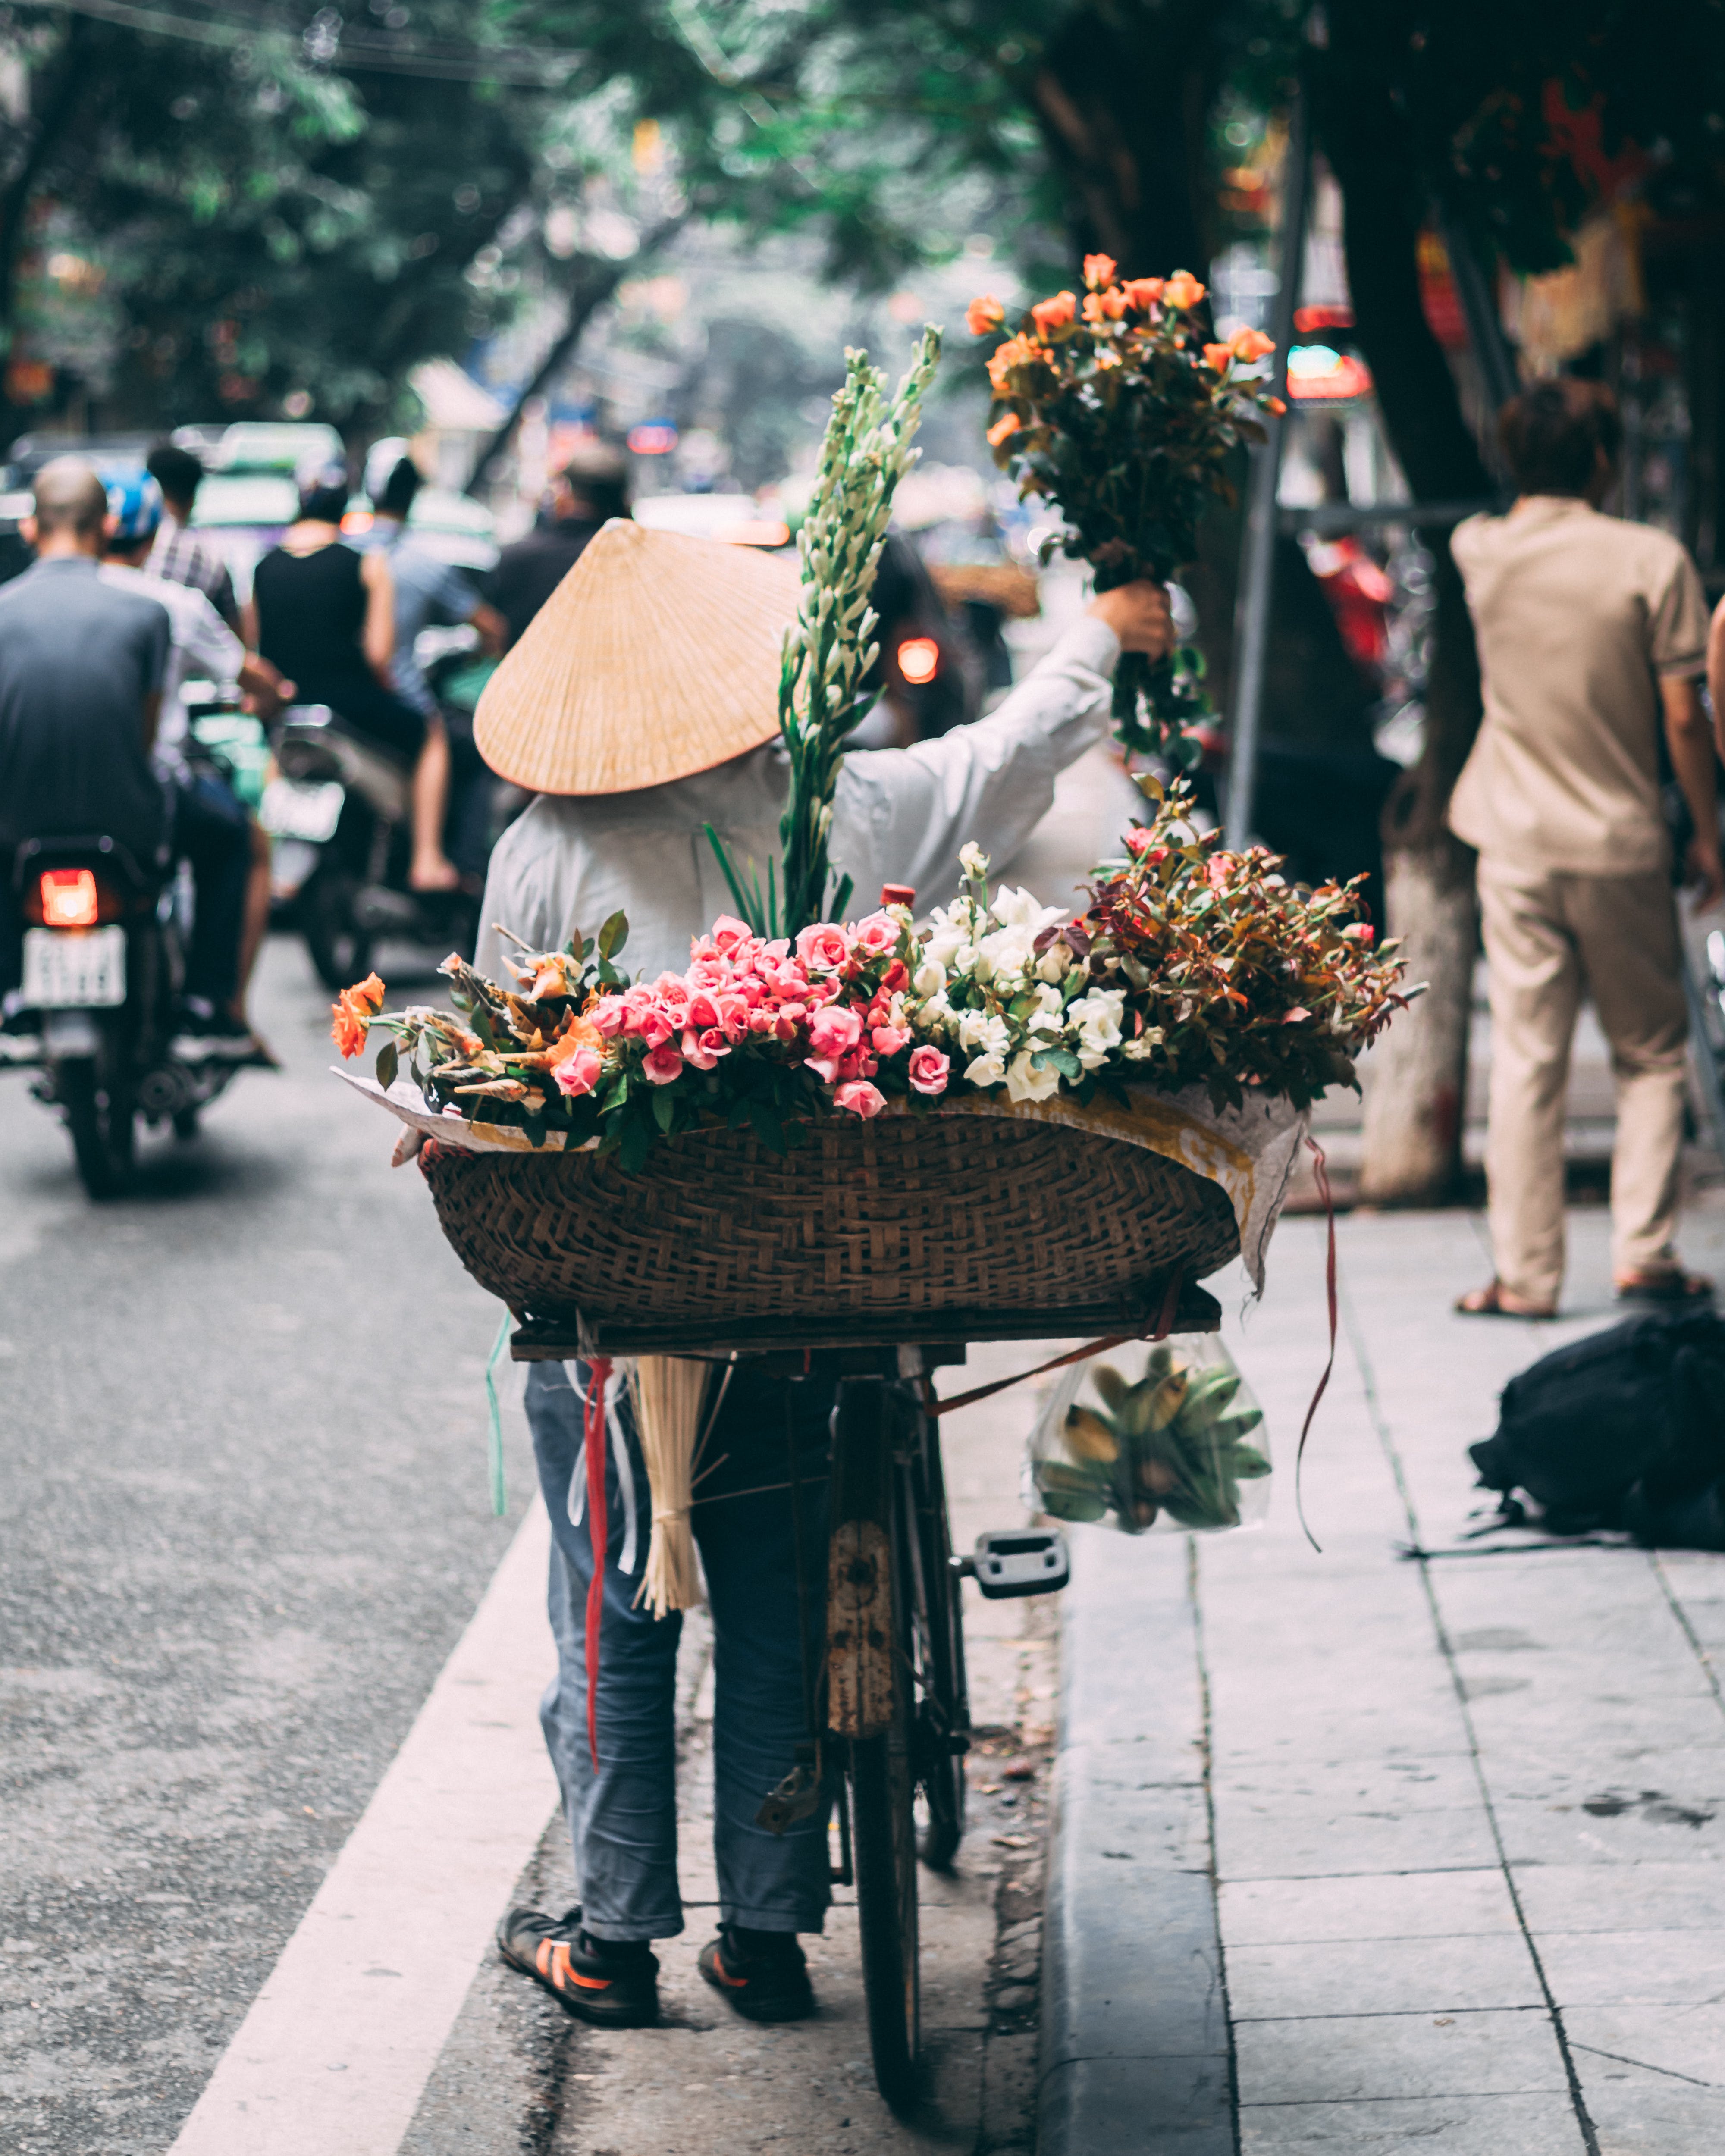 Vietnam Visa for the Mahorais Requirements, Process, and Options